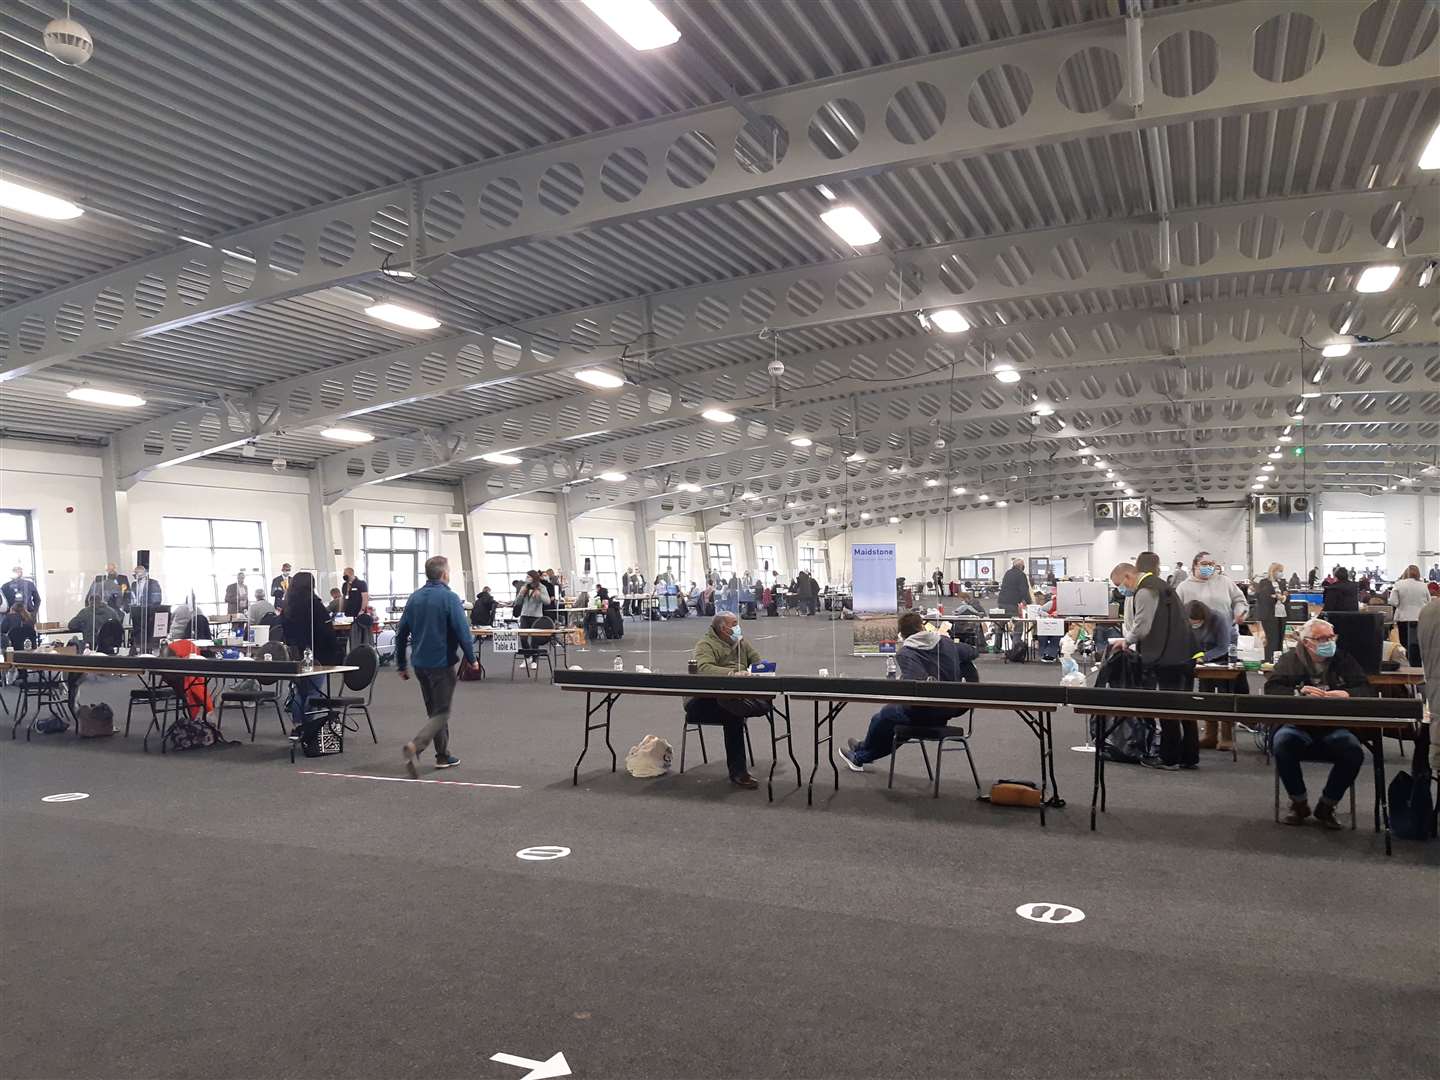 The Maidstone Borough Council election count at the Maidstone Exhibition Centre, Detling